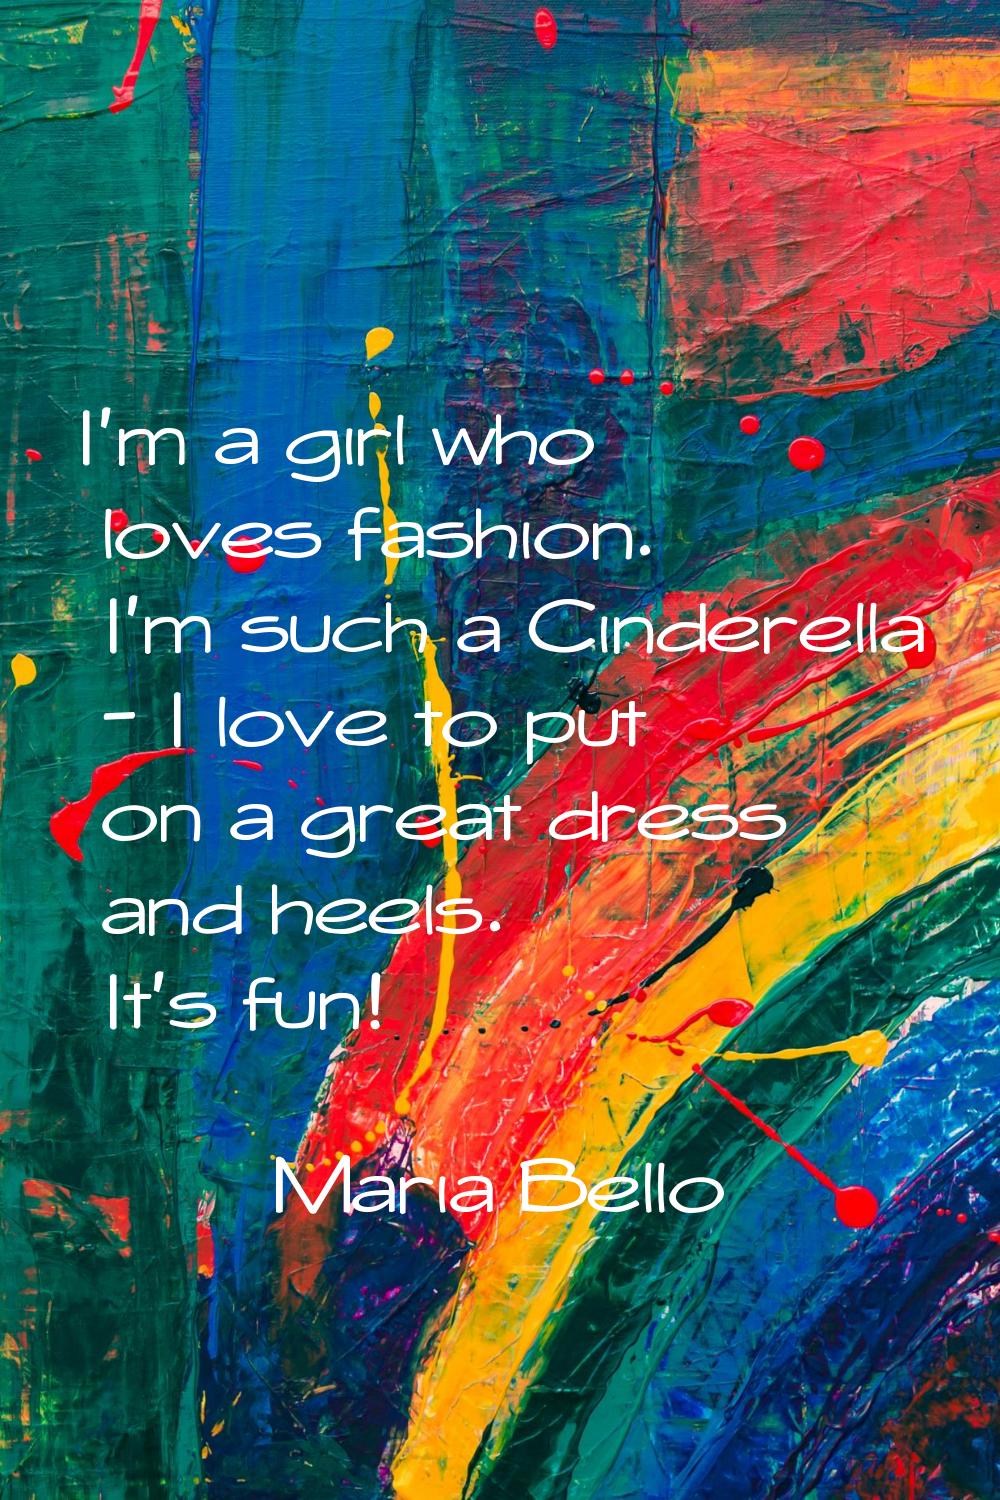 I'm a girl who loves fashion. I'm such a Cinderella - I love to put on a great dress and heels. It'